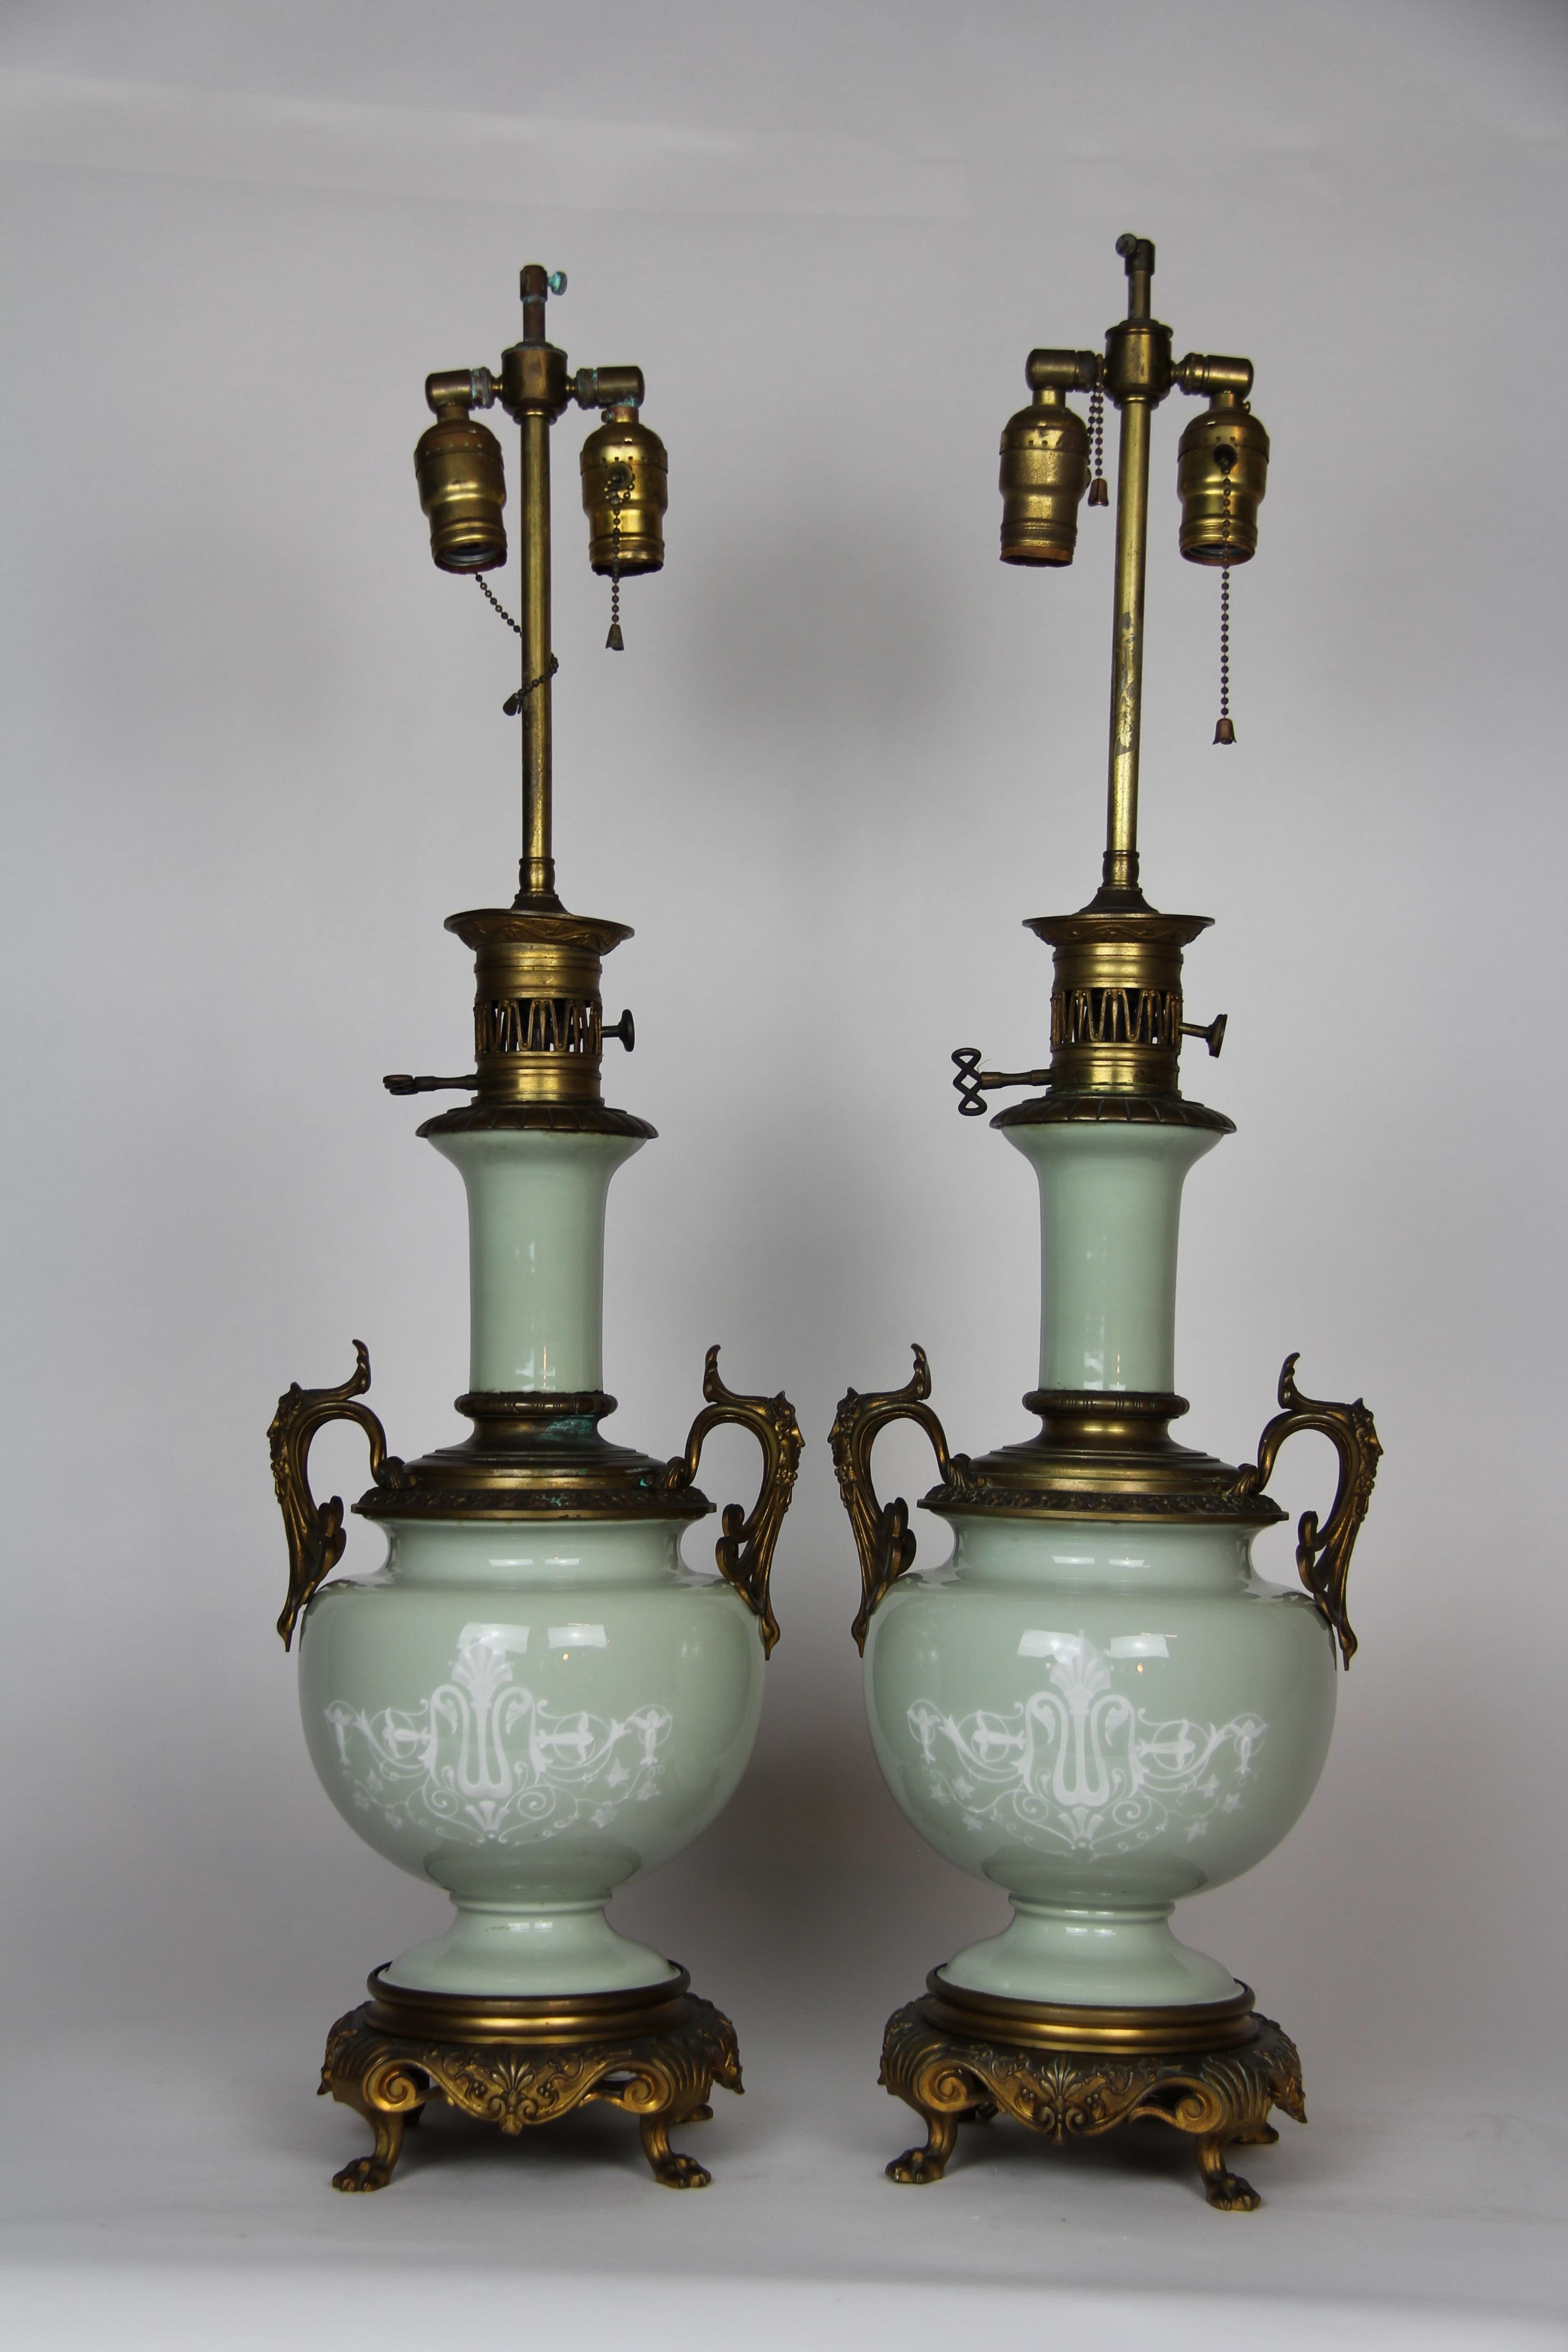 Louis XVI French Gilt Bronze Mounted Double-Sided Pate Sur Pate Celadon Ground Lamps, Pair For Sale